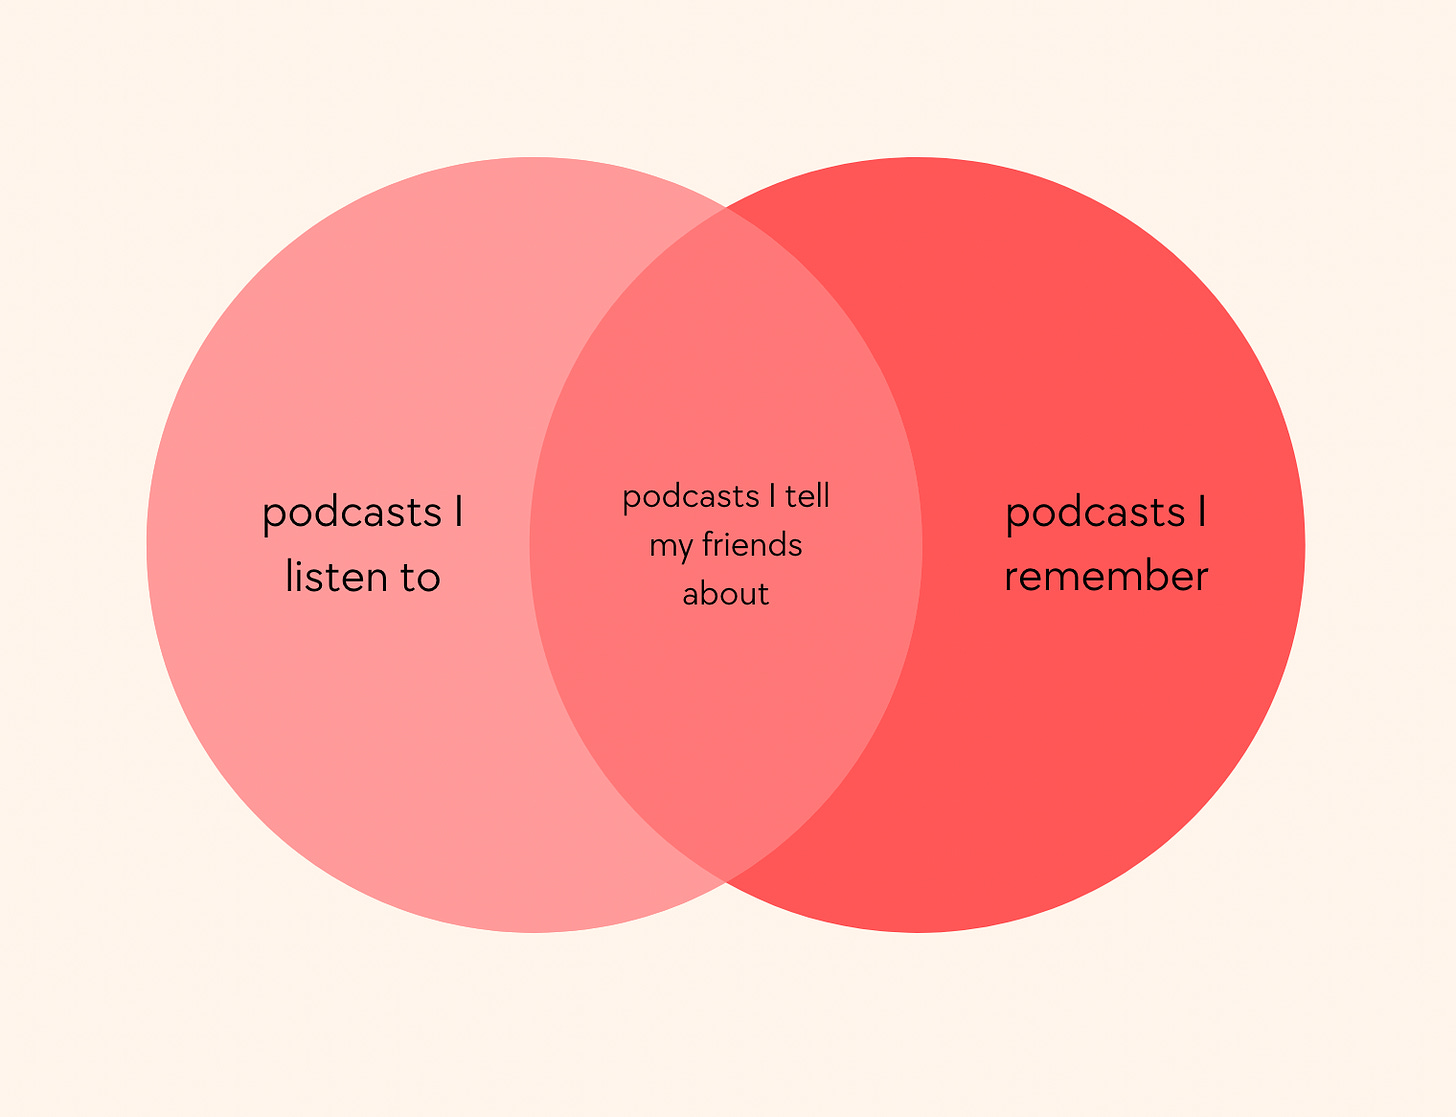 Venn diagram with "podcasts I listen to" on the left side, "podcasts I remember" on the right side, and "podcasts I tell my friends about" in the middle.